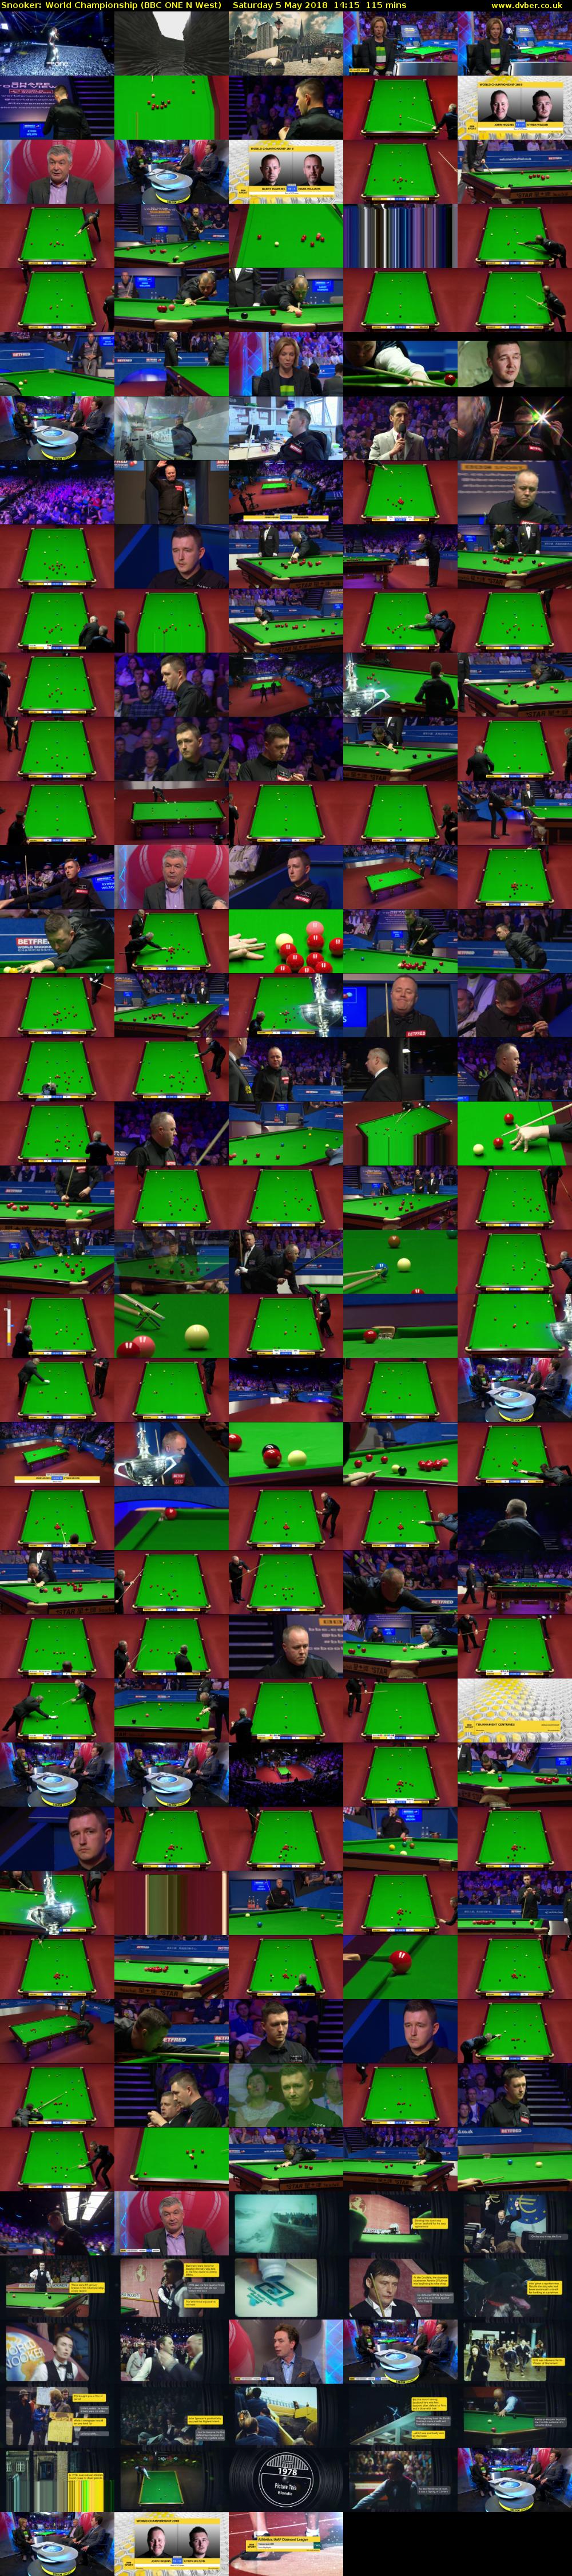 Snooker: World Championship (BBC ONE N West) Saturday 5 May 2018 14:15 - 16:10